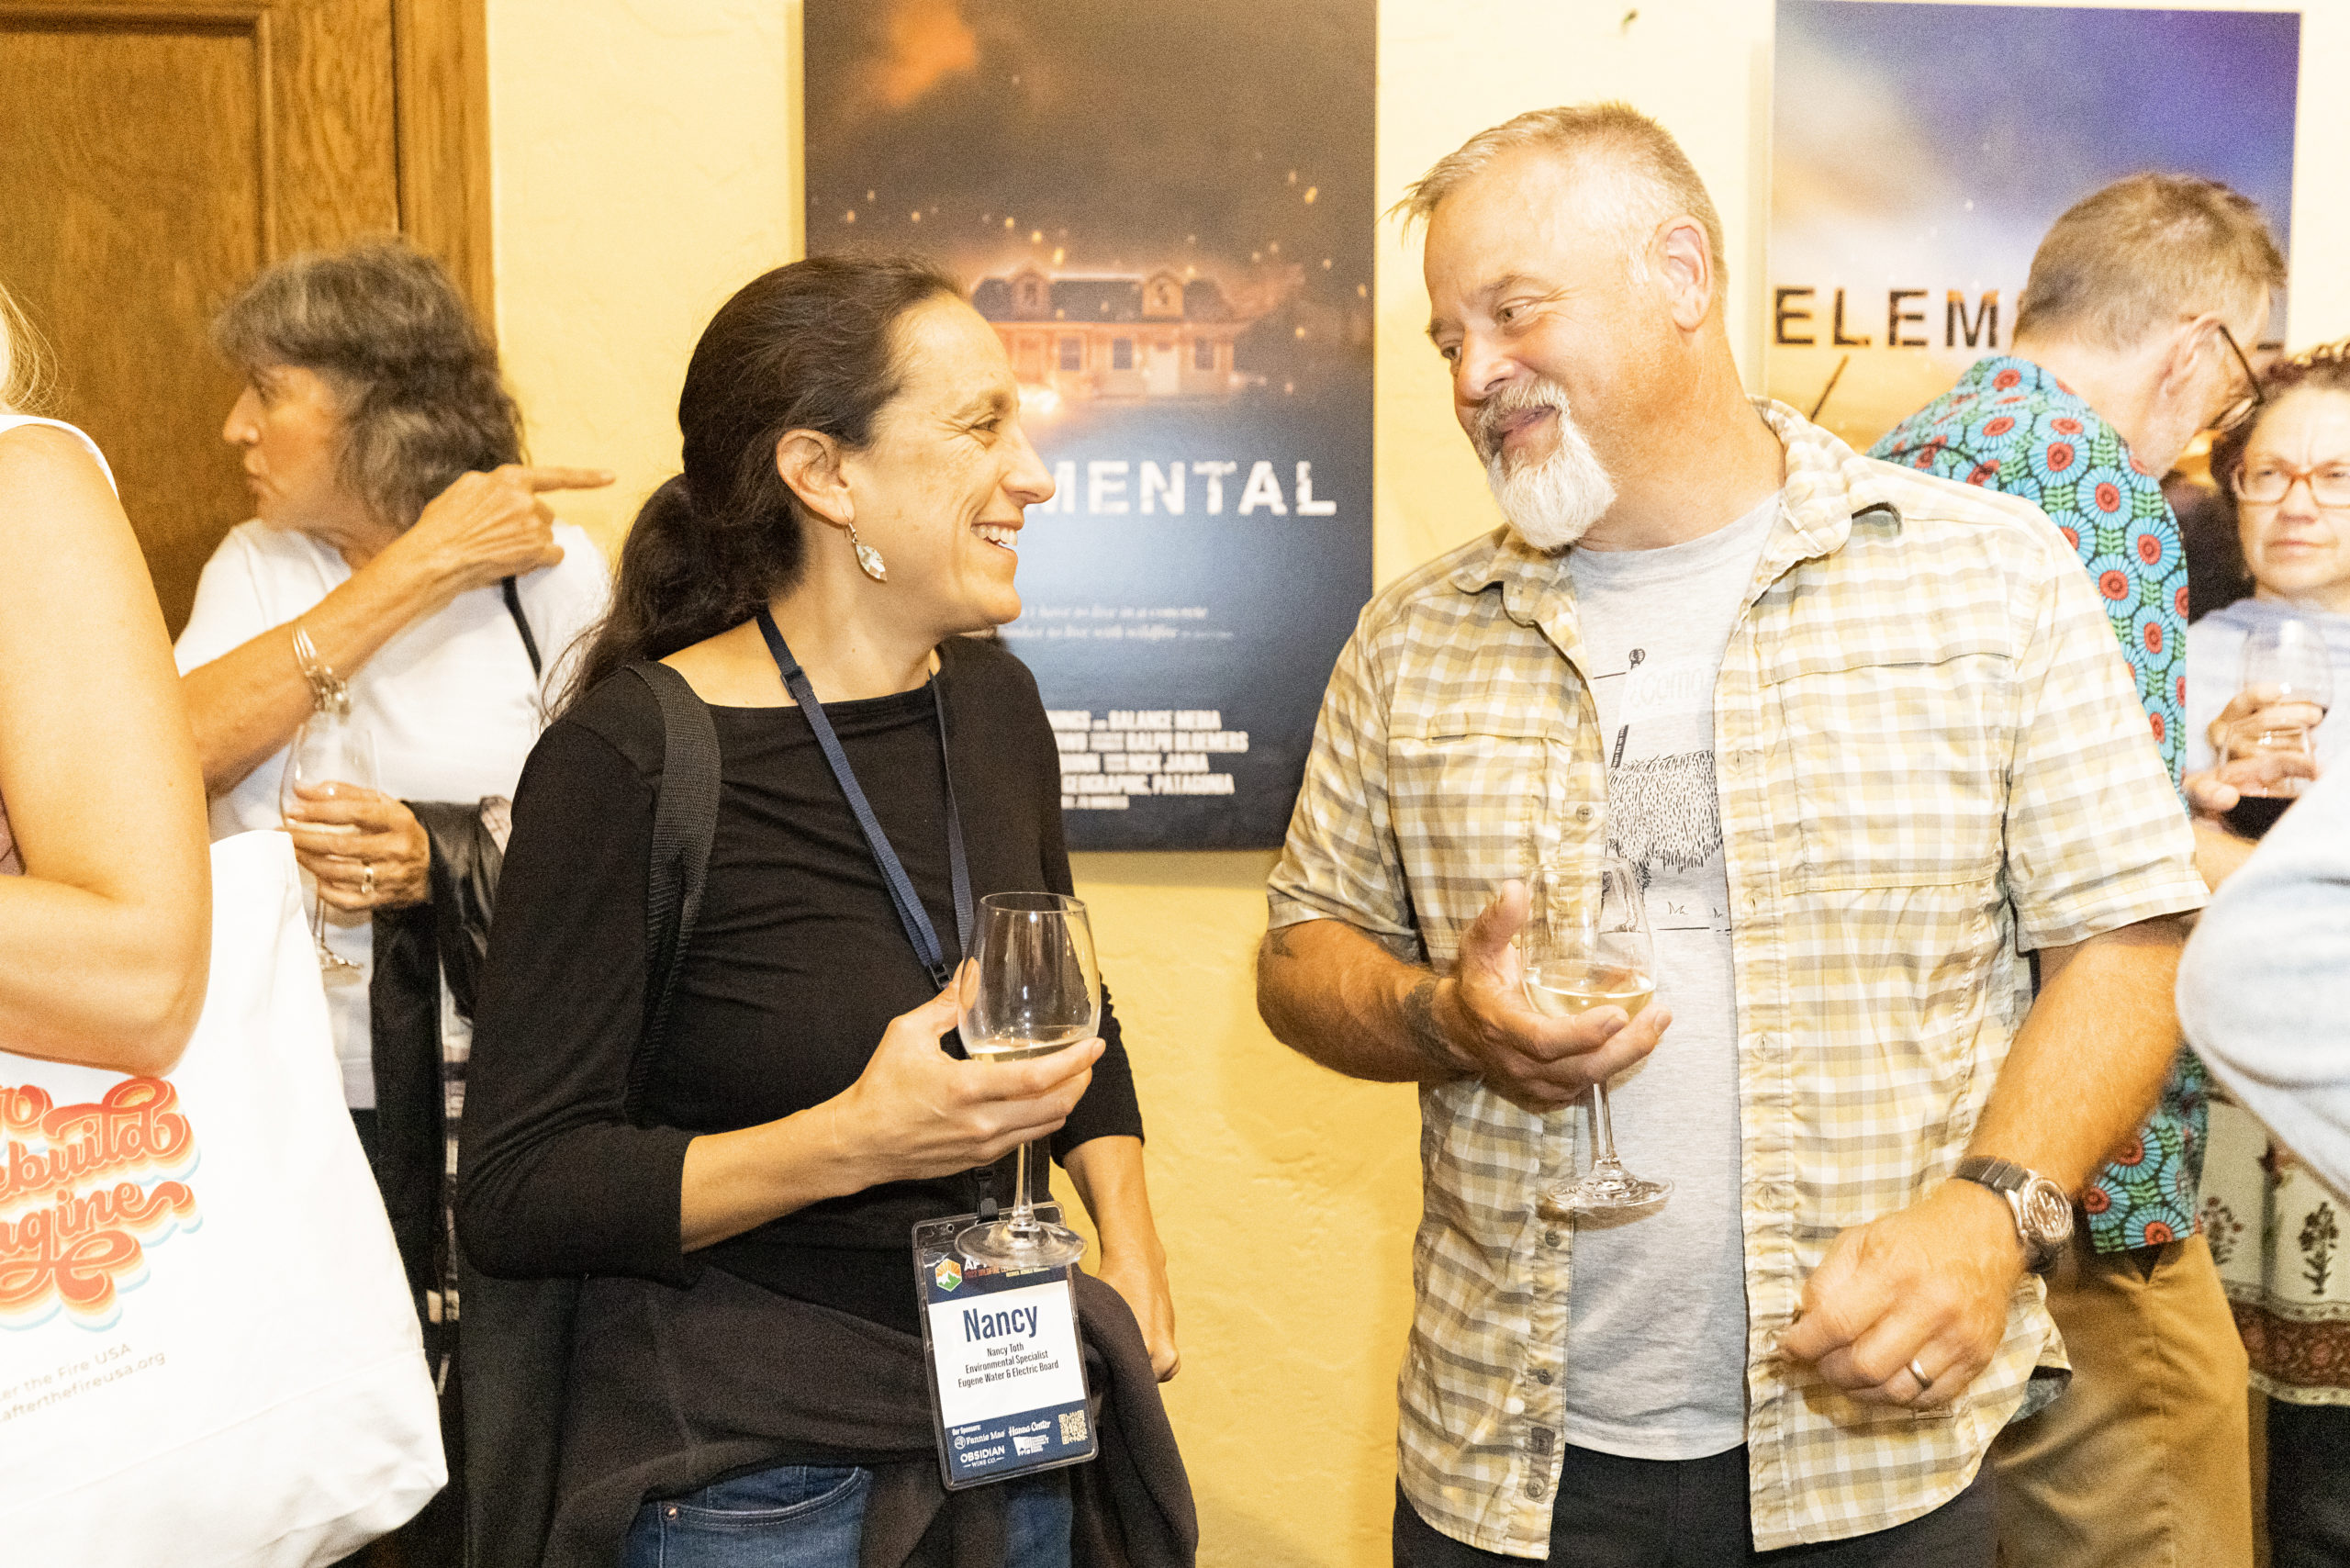 At Sebastiani Theater during the Reception for the private screening of Elemental, sponsored by Obsidian Wine Company Photo by CGenesis Botello